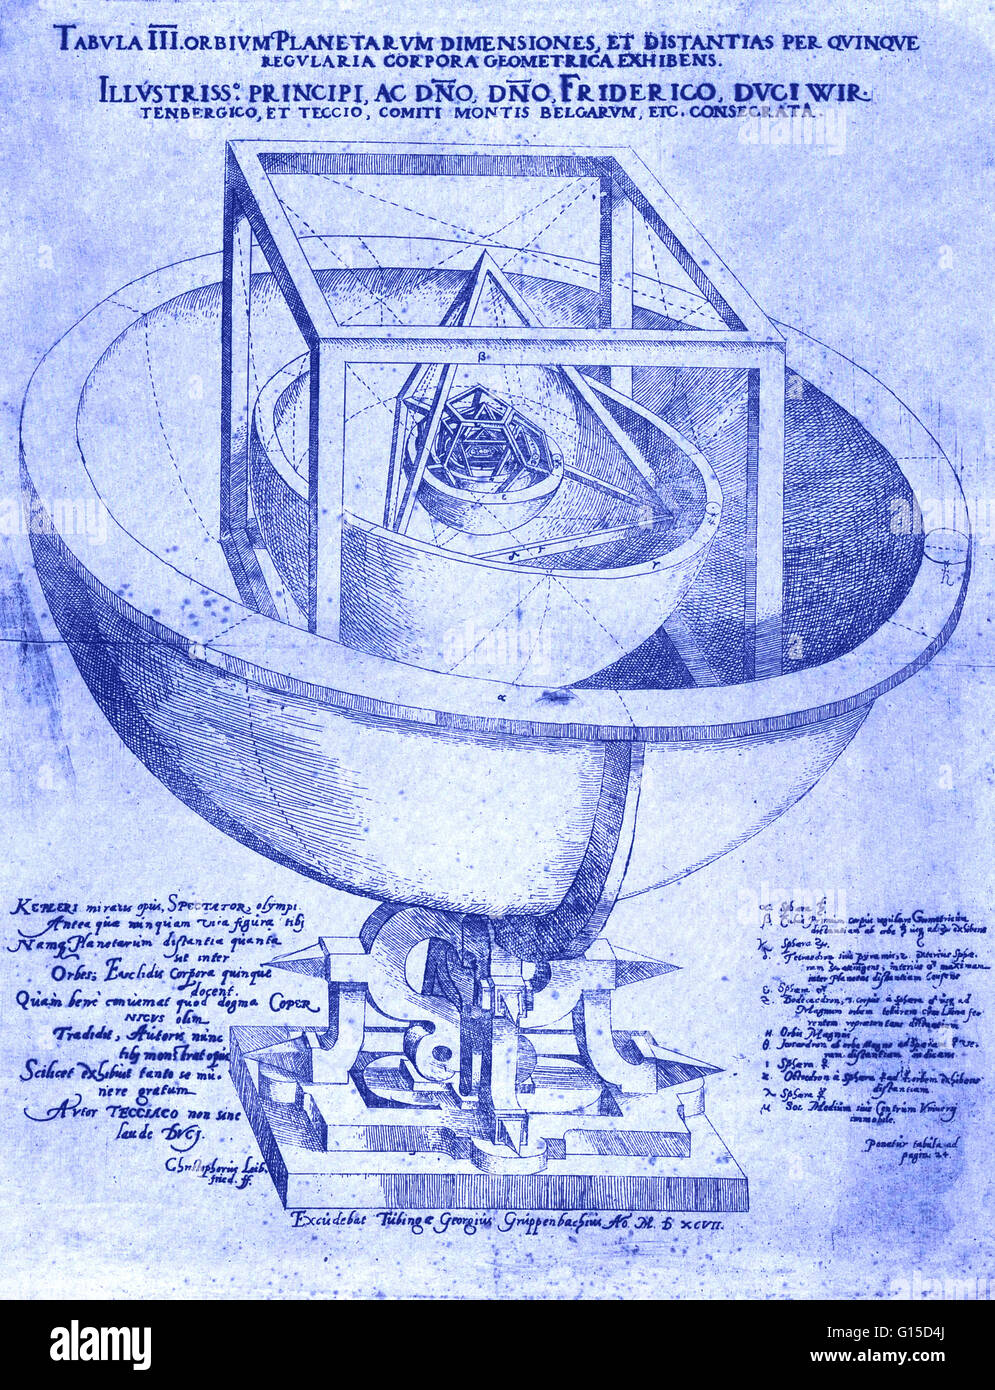 Model of the orbit of the planets by Johannes Kepler, devised in 1596-97. German astronomer Kepler devised the three fundamental laws of planetary motion. These laws were based on detailed observations of the planets made by Tycho Brahe and himself. Keple Stock Photo